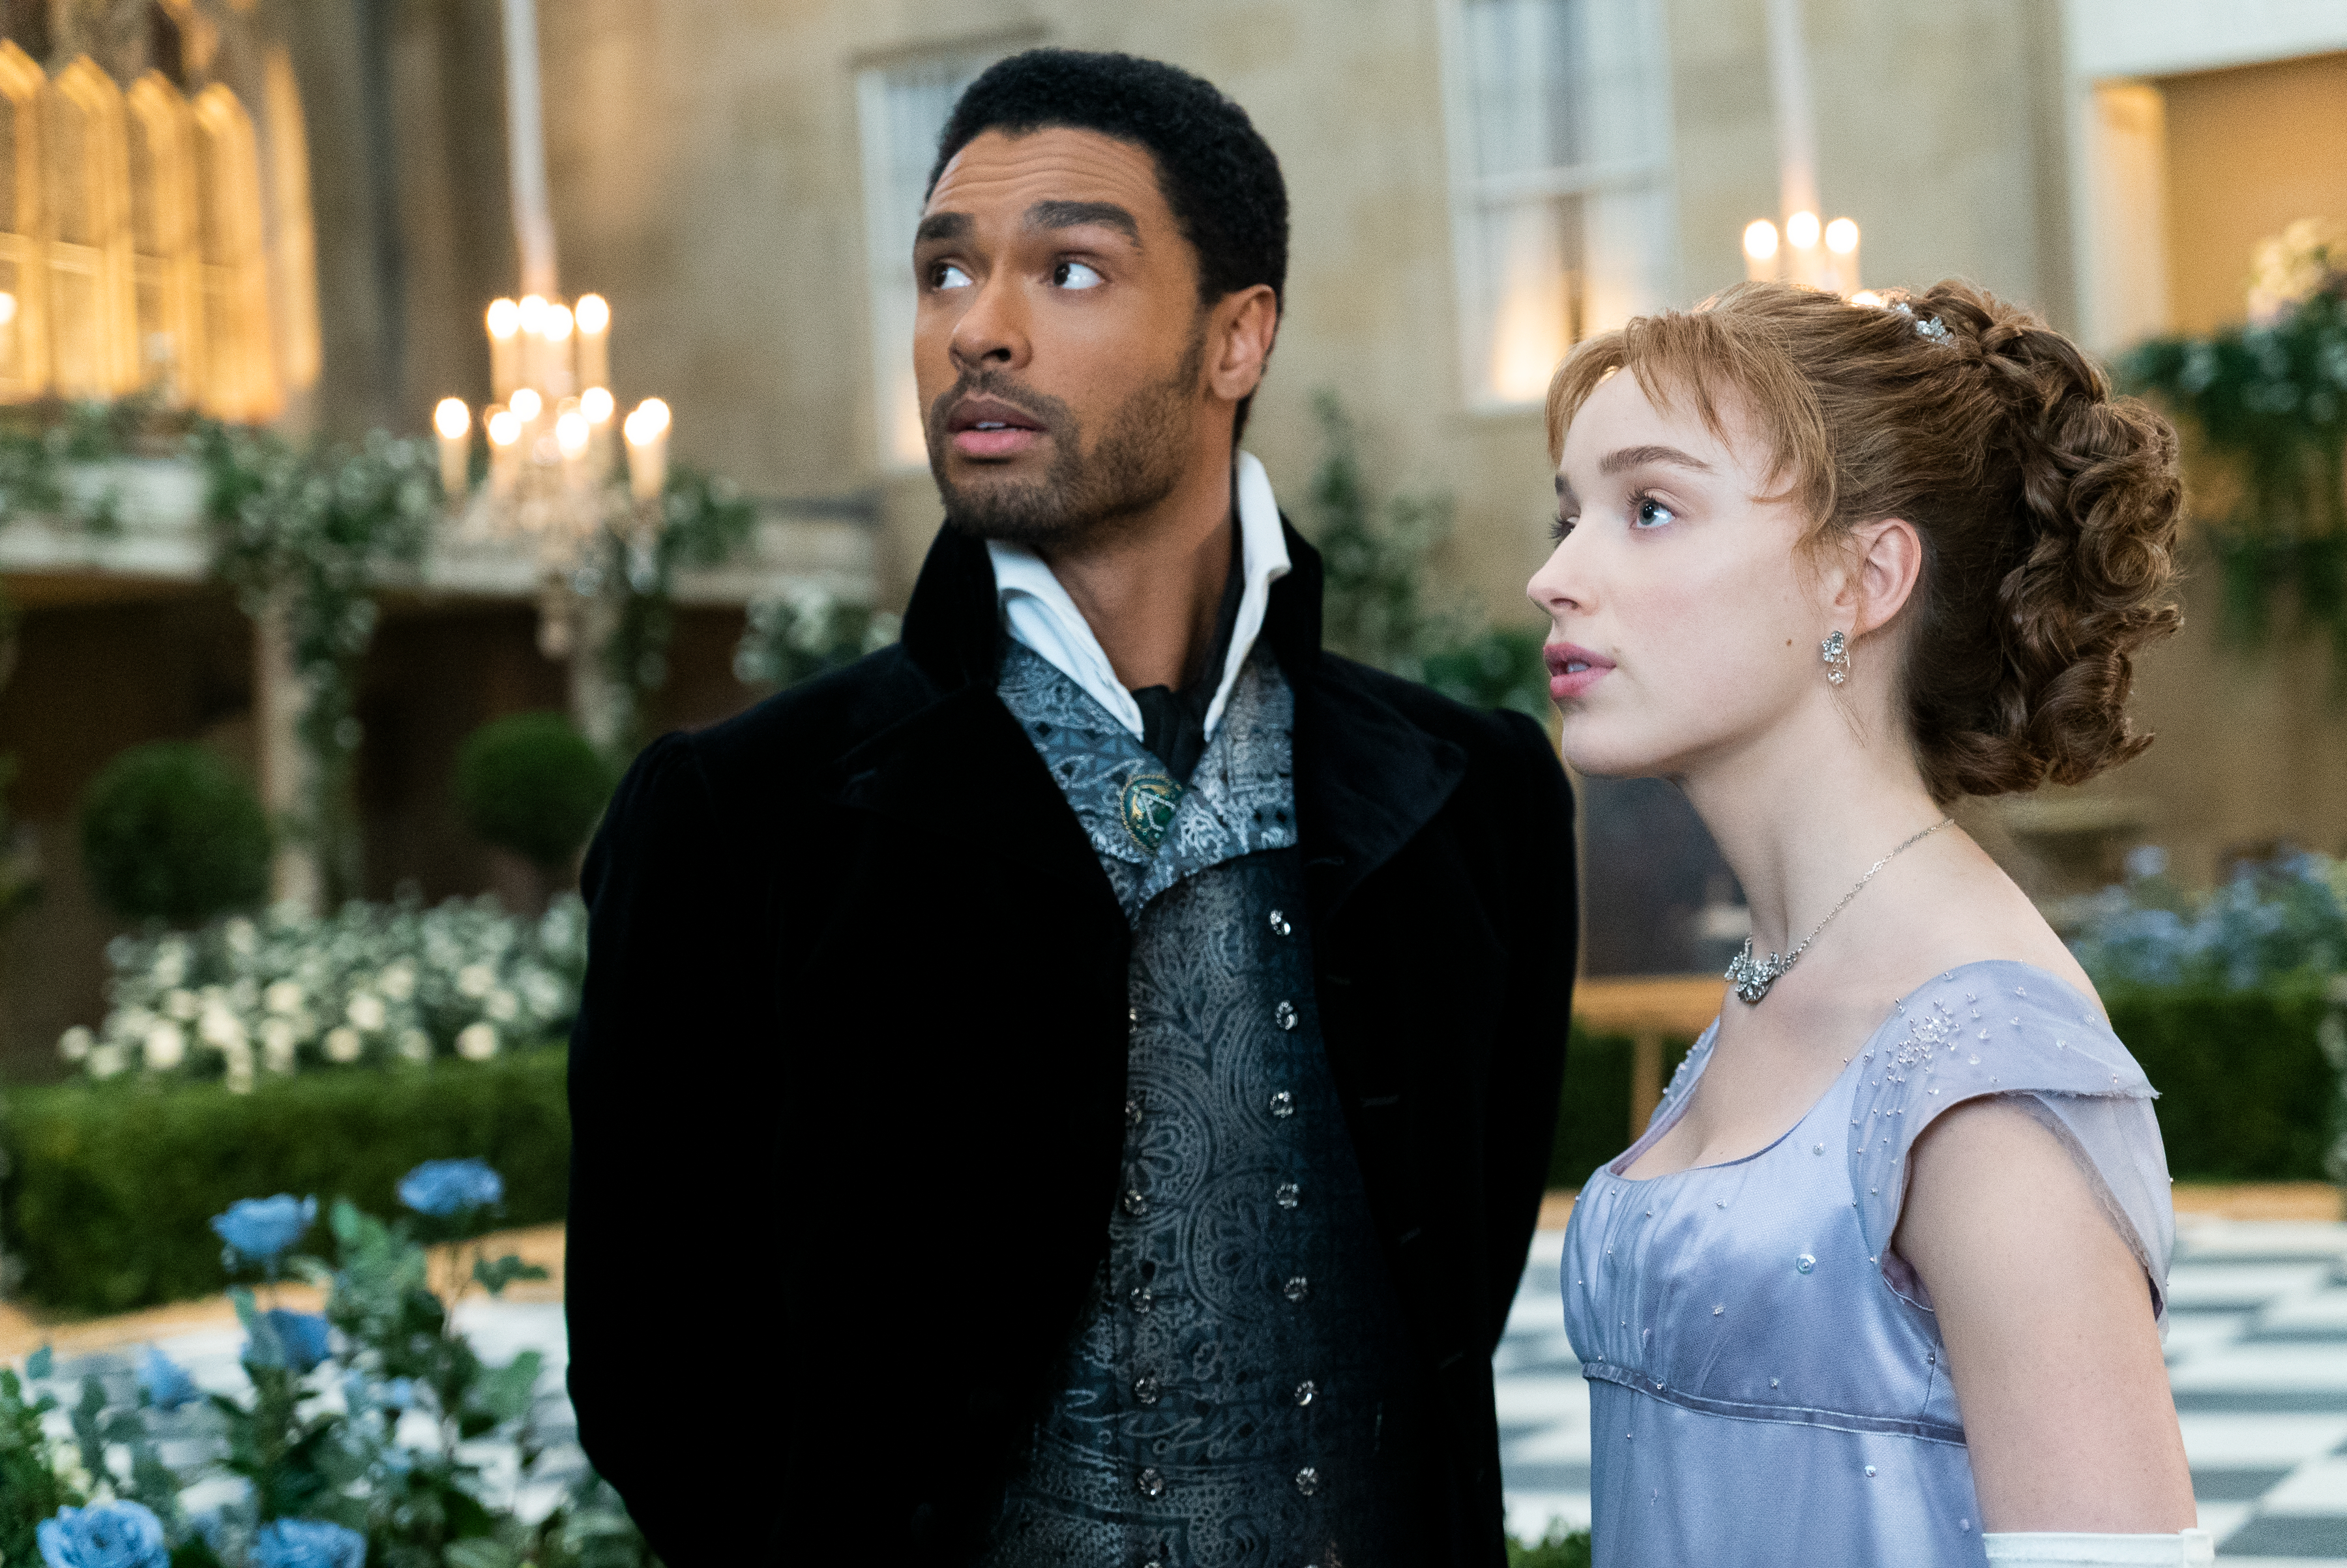 <p><span>The first season of "Bridgerton," which debuted in 2020, told the story of how eligible eldest daughter </span>Daphne Bridgerton (played by Phoebe Dynevor) and committed bachelor Simon Basset, the Duke of Hastings (played by Rege-Jean Page), hatched a scheme to benefit them both as they entered the marriage market then ended up falling for one another -- all while a new gossip sheet written by the anonymous Lady Whistledown intrigues the ton.</p><p><span>MORE: </span><a href="https://www.wonderwall.com/celebrity/photos/bridgerton-season-3-first-look-all-the-new-pictures-824065.gallery">Official first look at season 3 of "Bridgerton": The best photos</a></p>